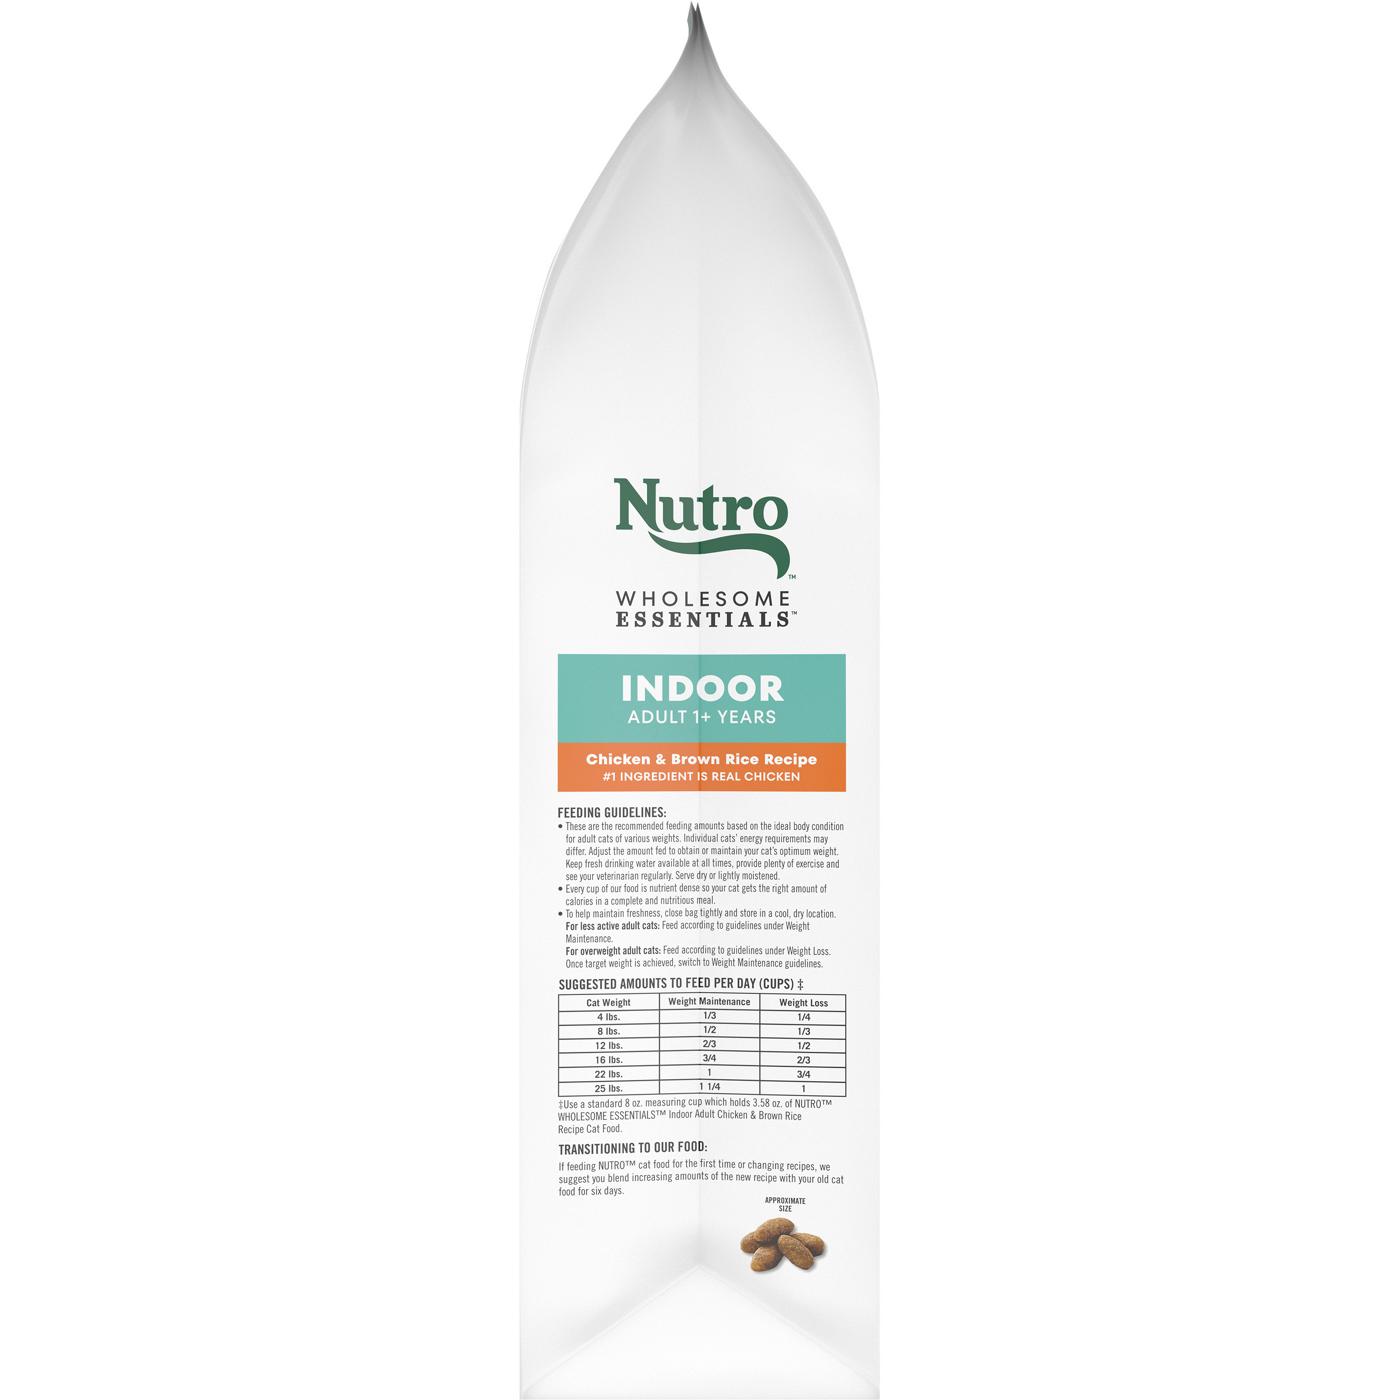 Nutro Wholesome Essentials Chicken & Brown Rice Adult Indoor Dry Cat Food; image 3 of 4